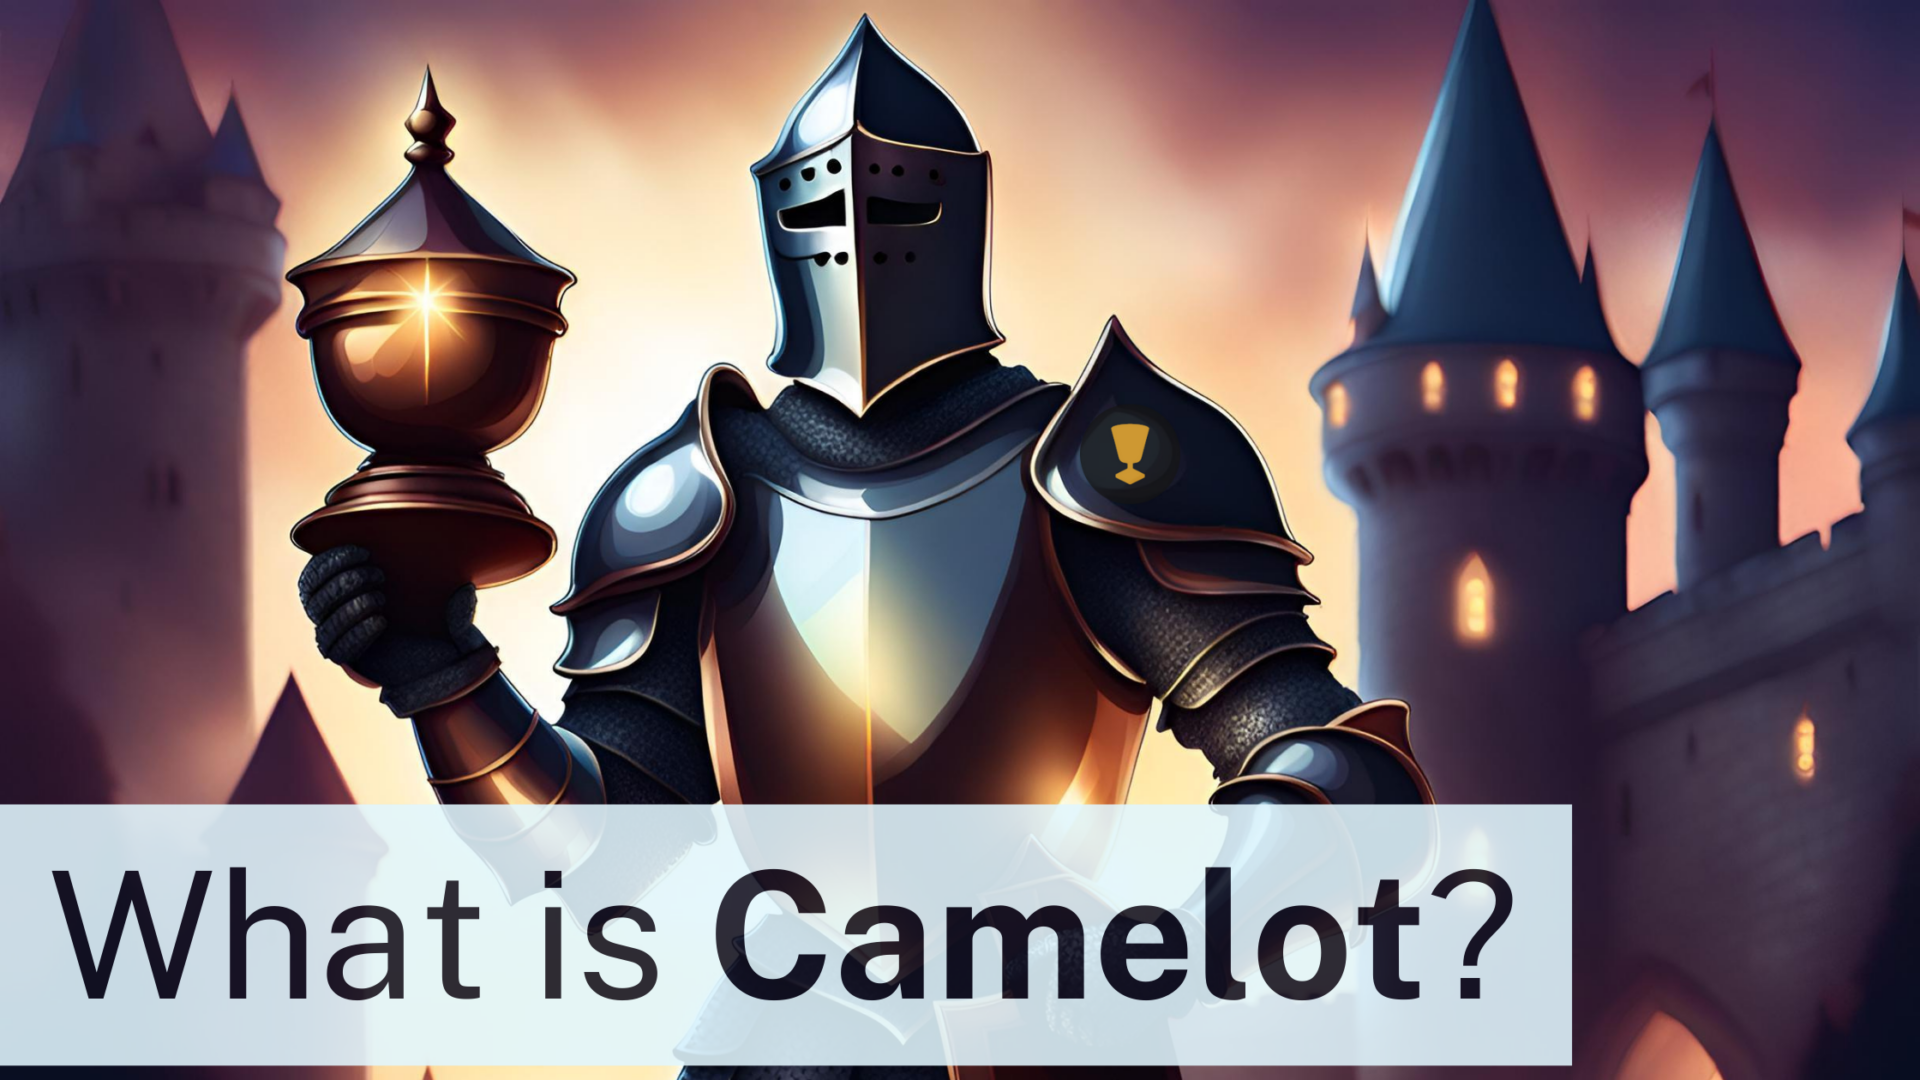 What is Camelot?